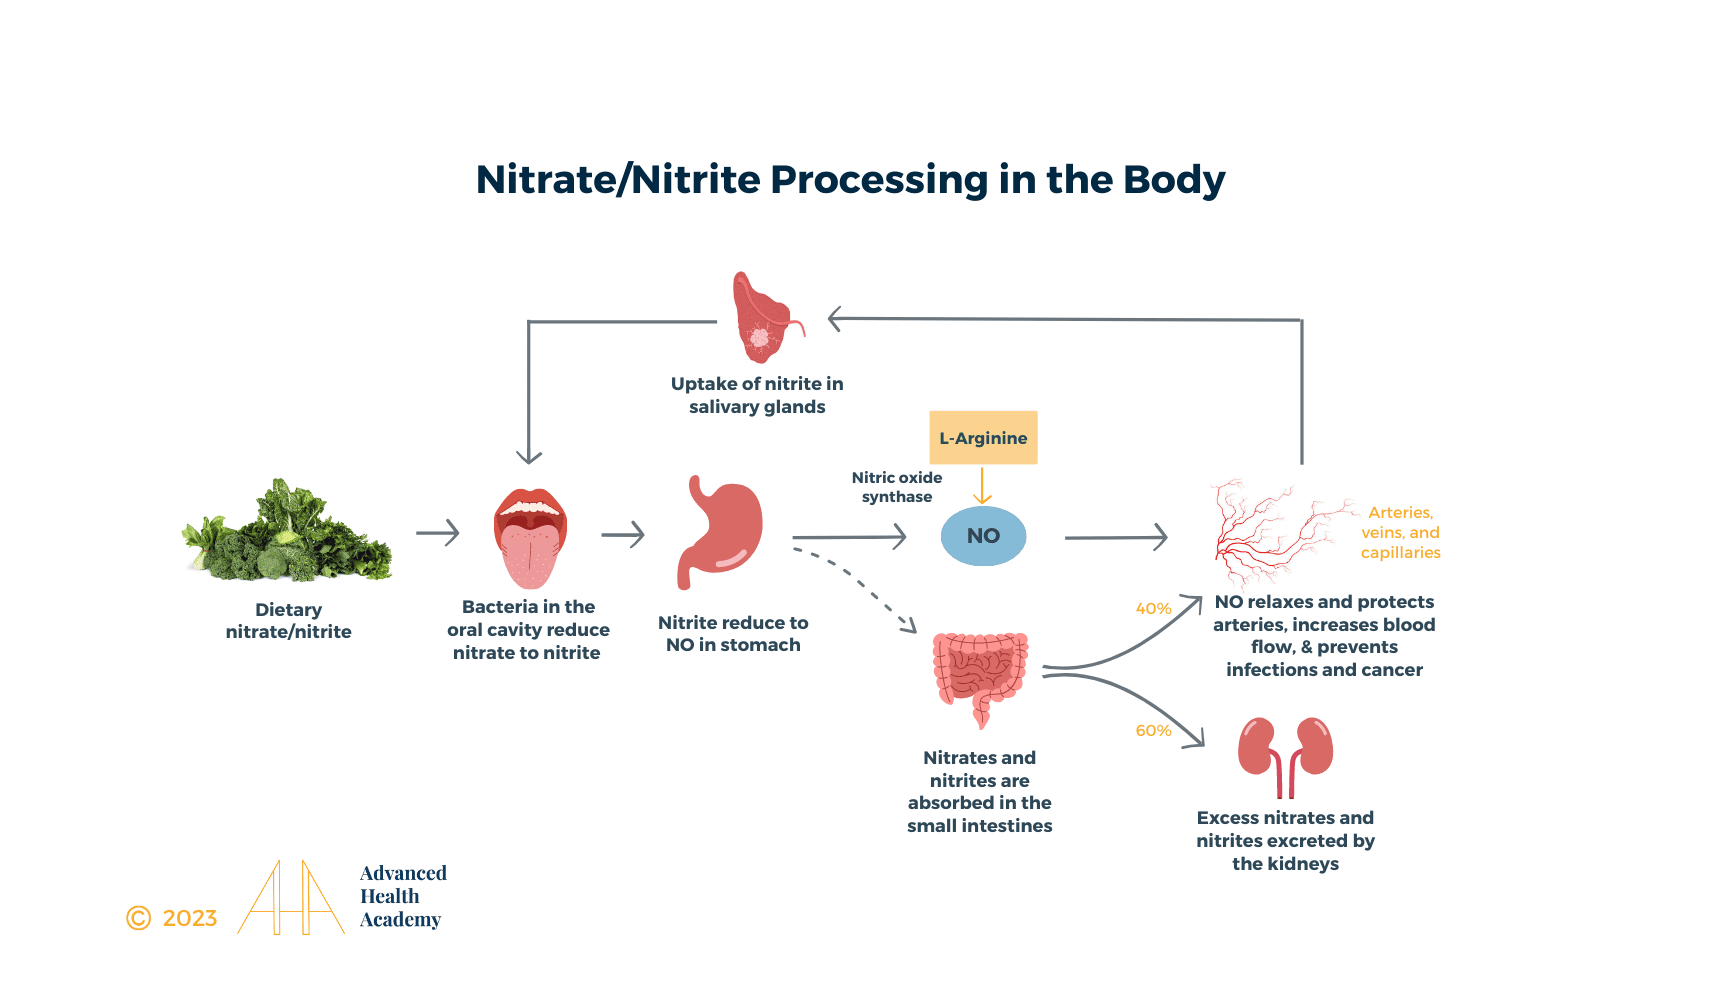 Nitrate/Nitrite Processing in the Body